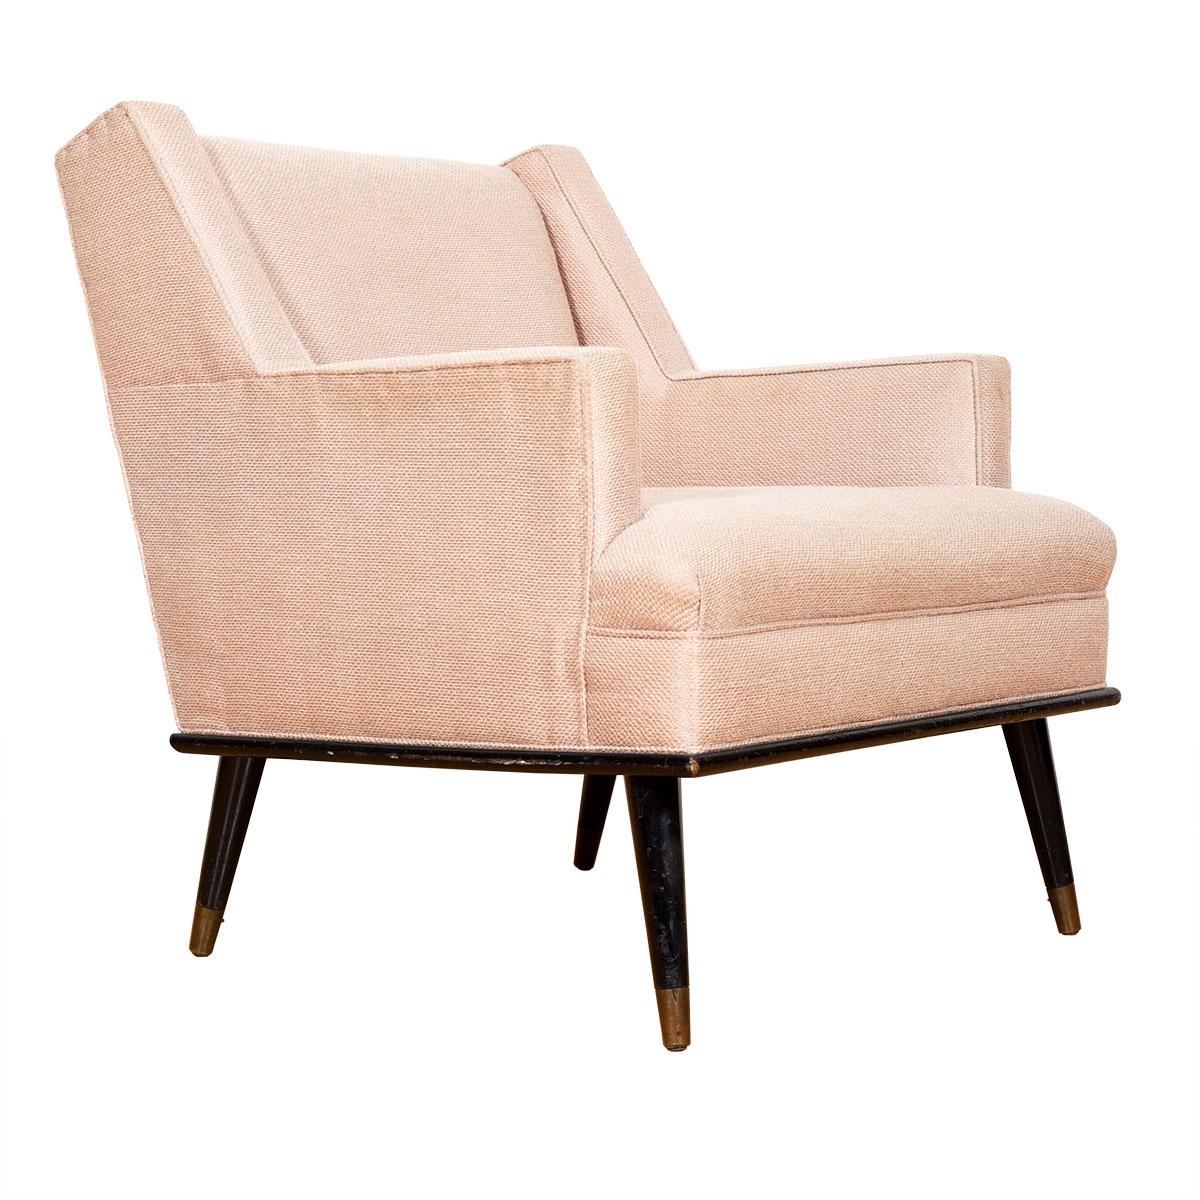 Gorgeous transitional club chair with mid century flair by Mil Baughman.
Fully upholstered chair on black splayed legs.
